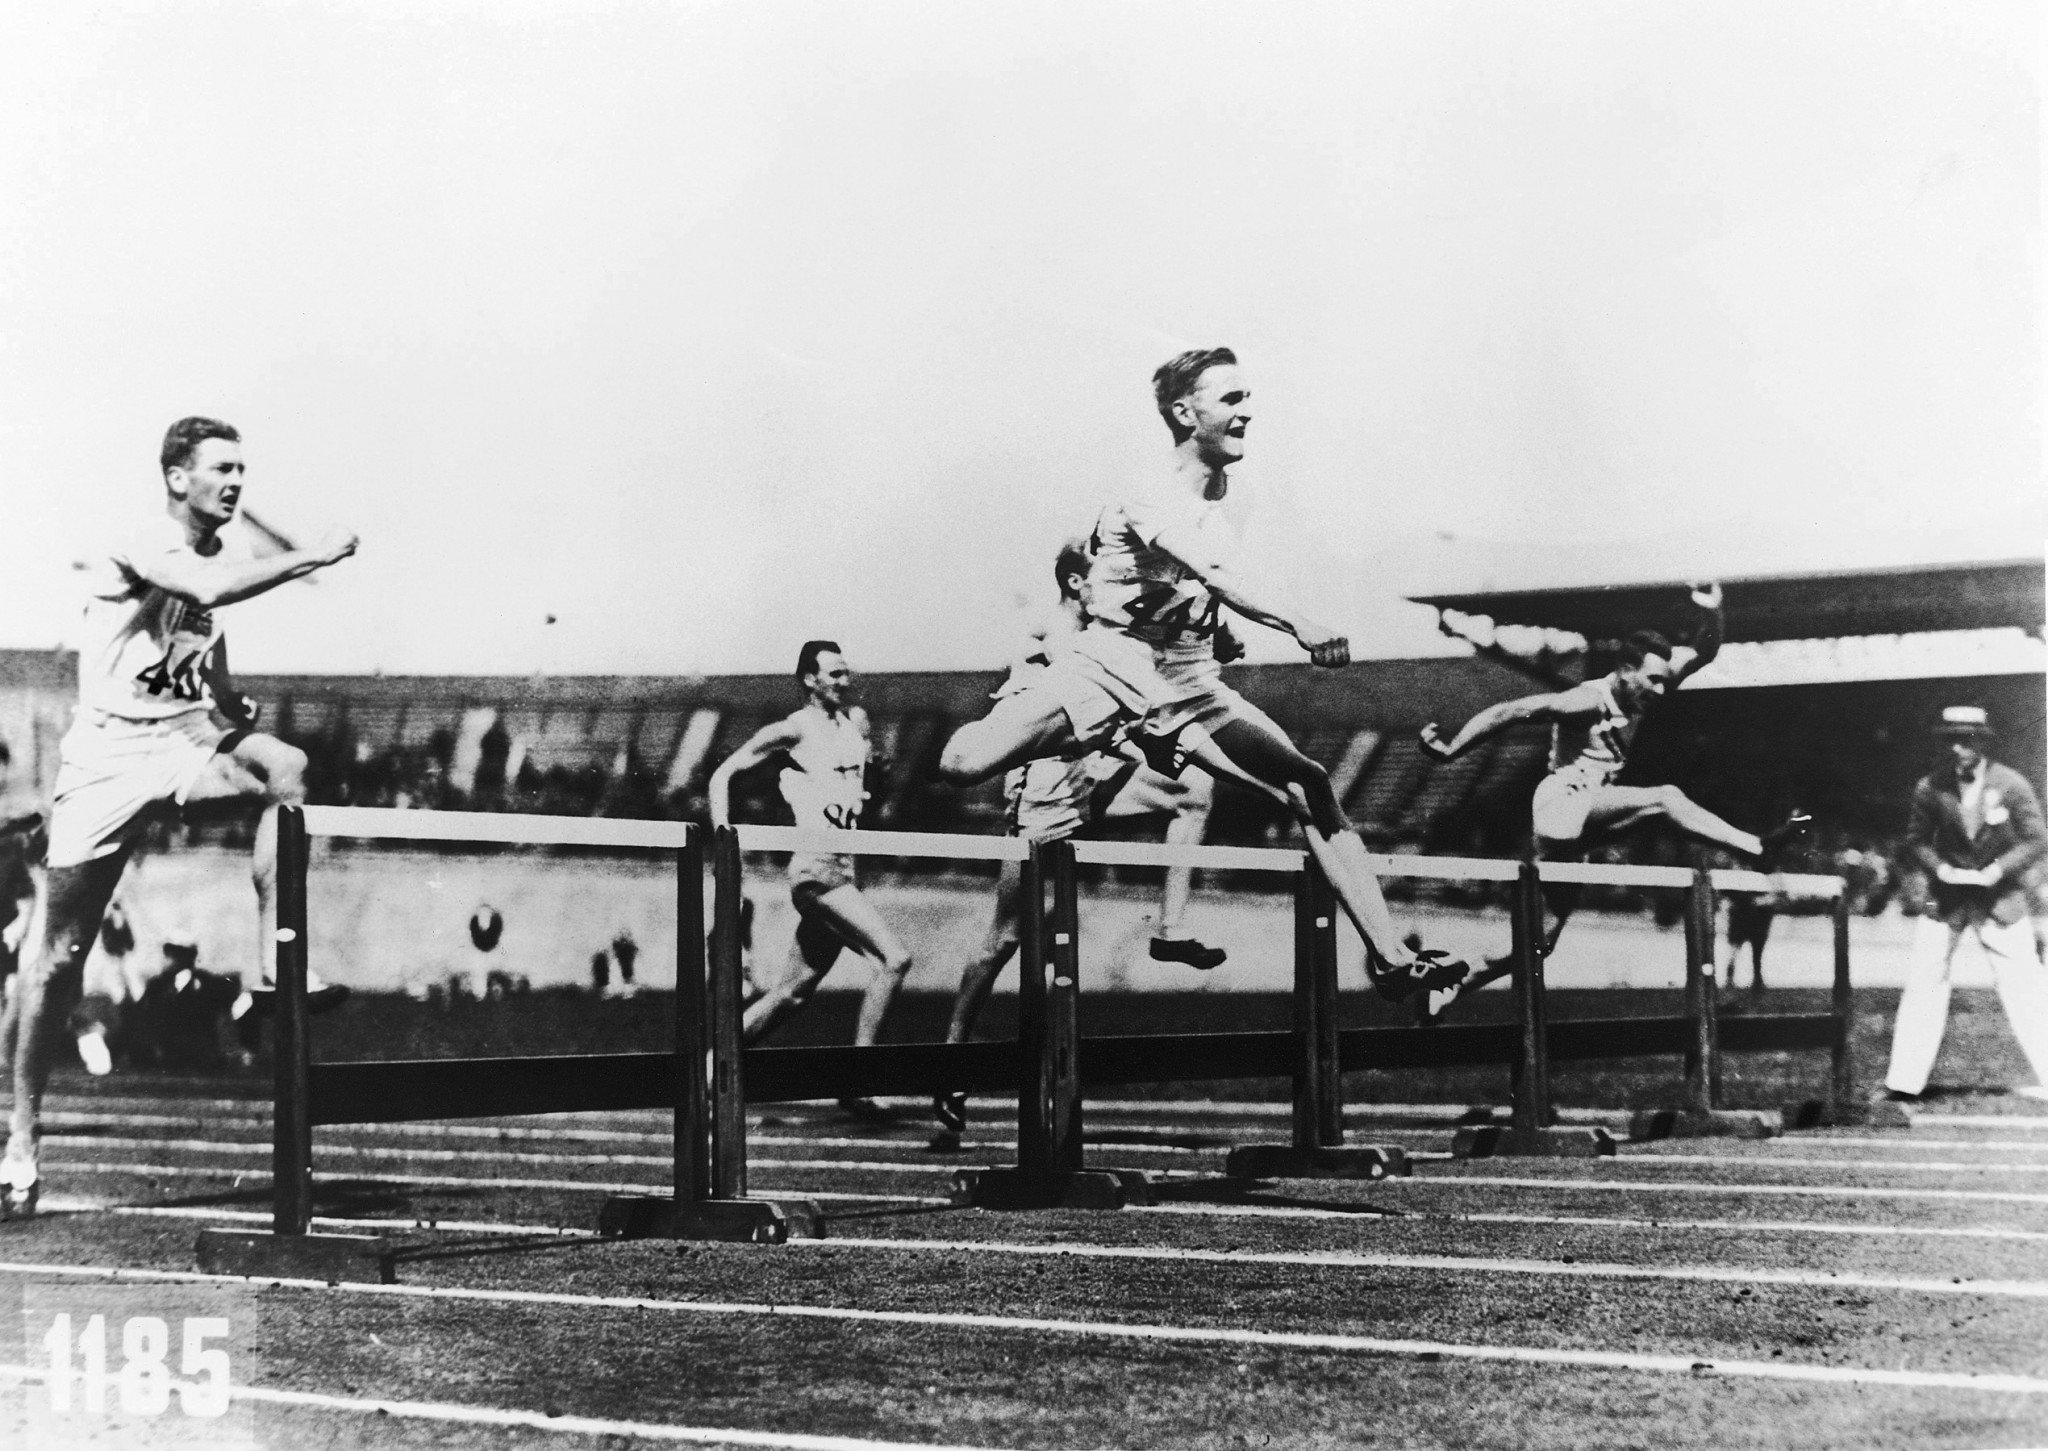 Lord Burghley en-route to winning Olympic gold at the Amsterdam 1928 Games ©Getty Images